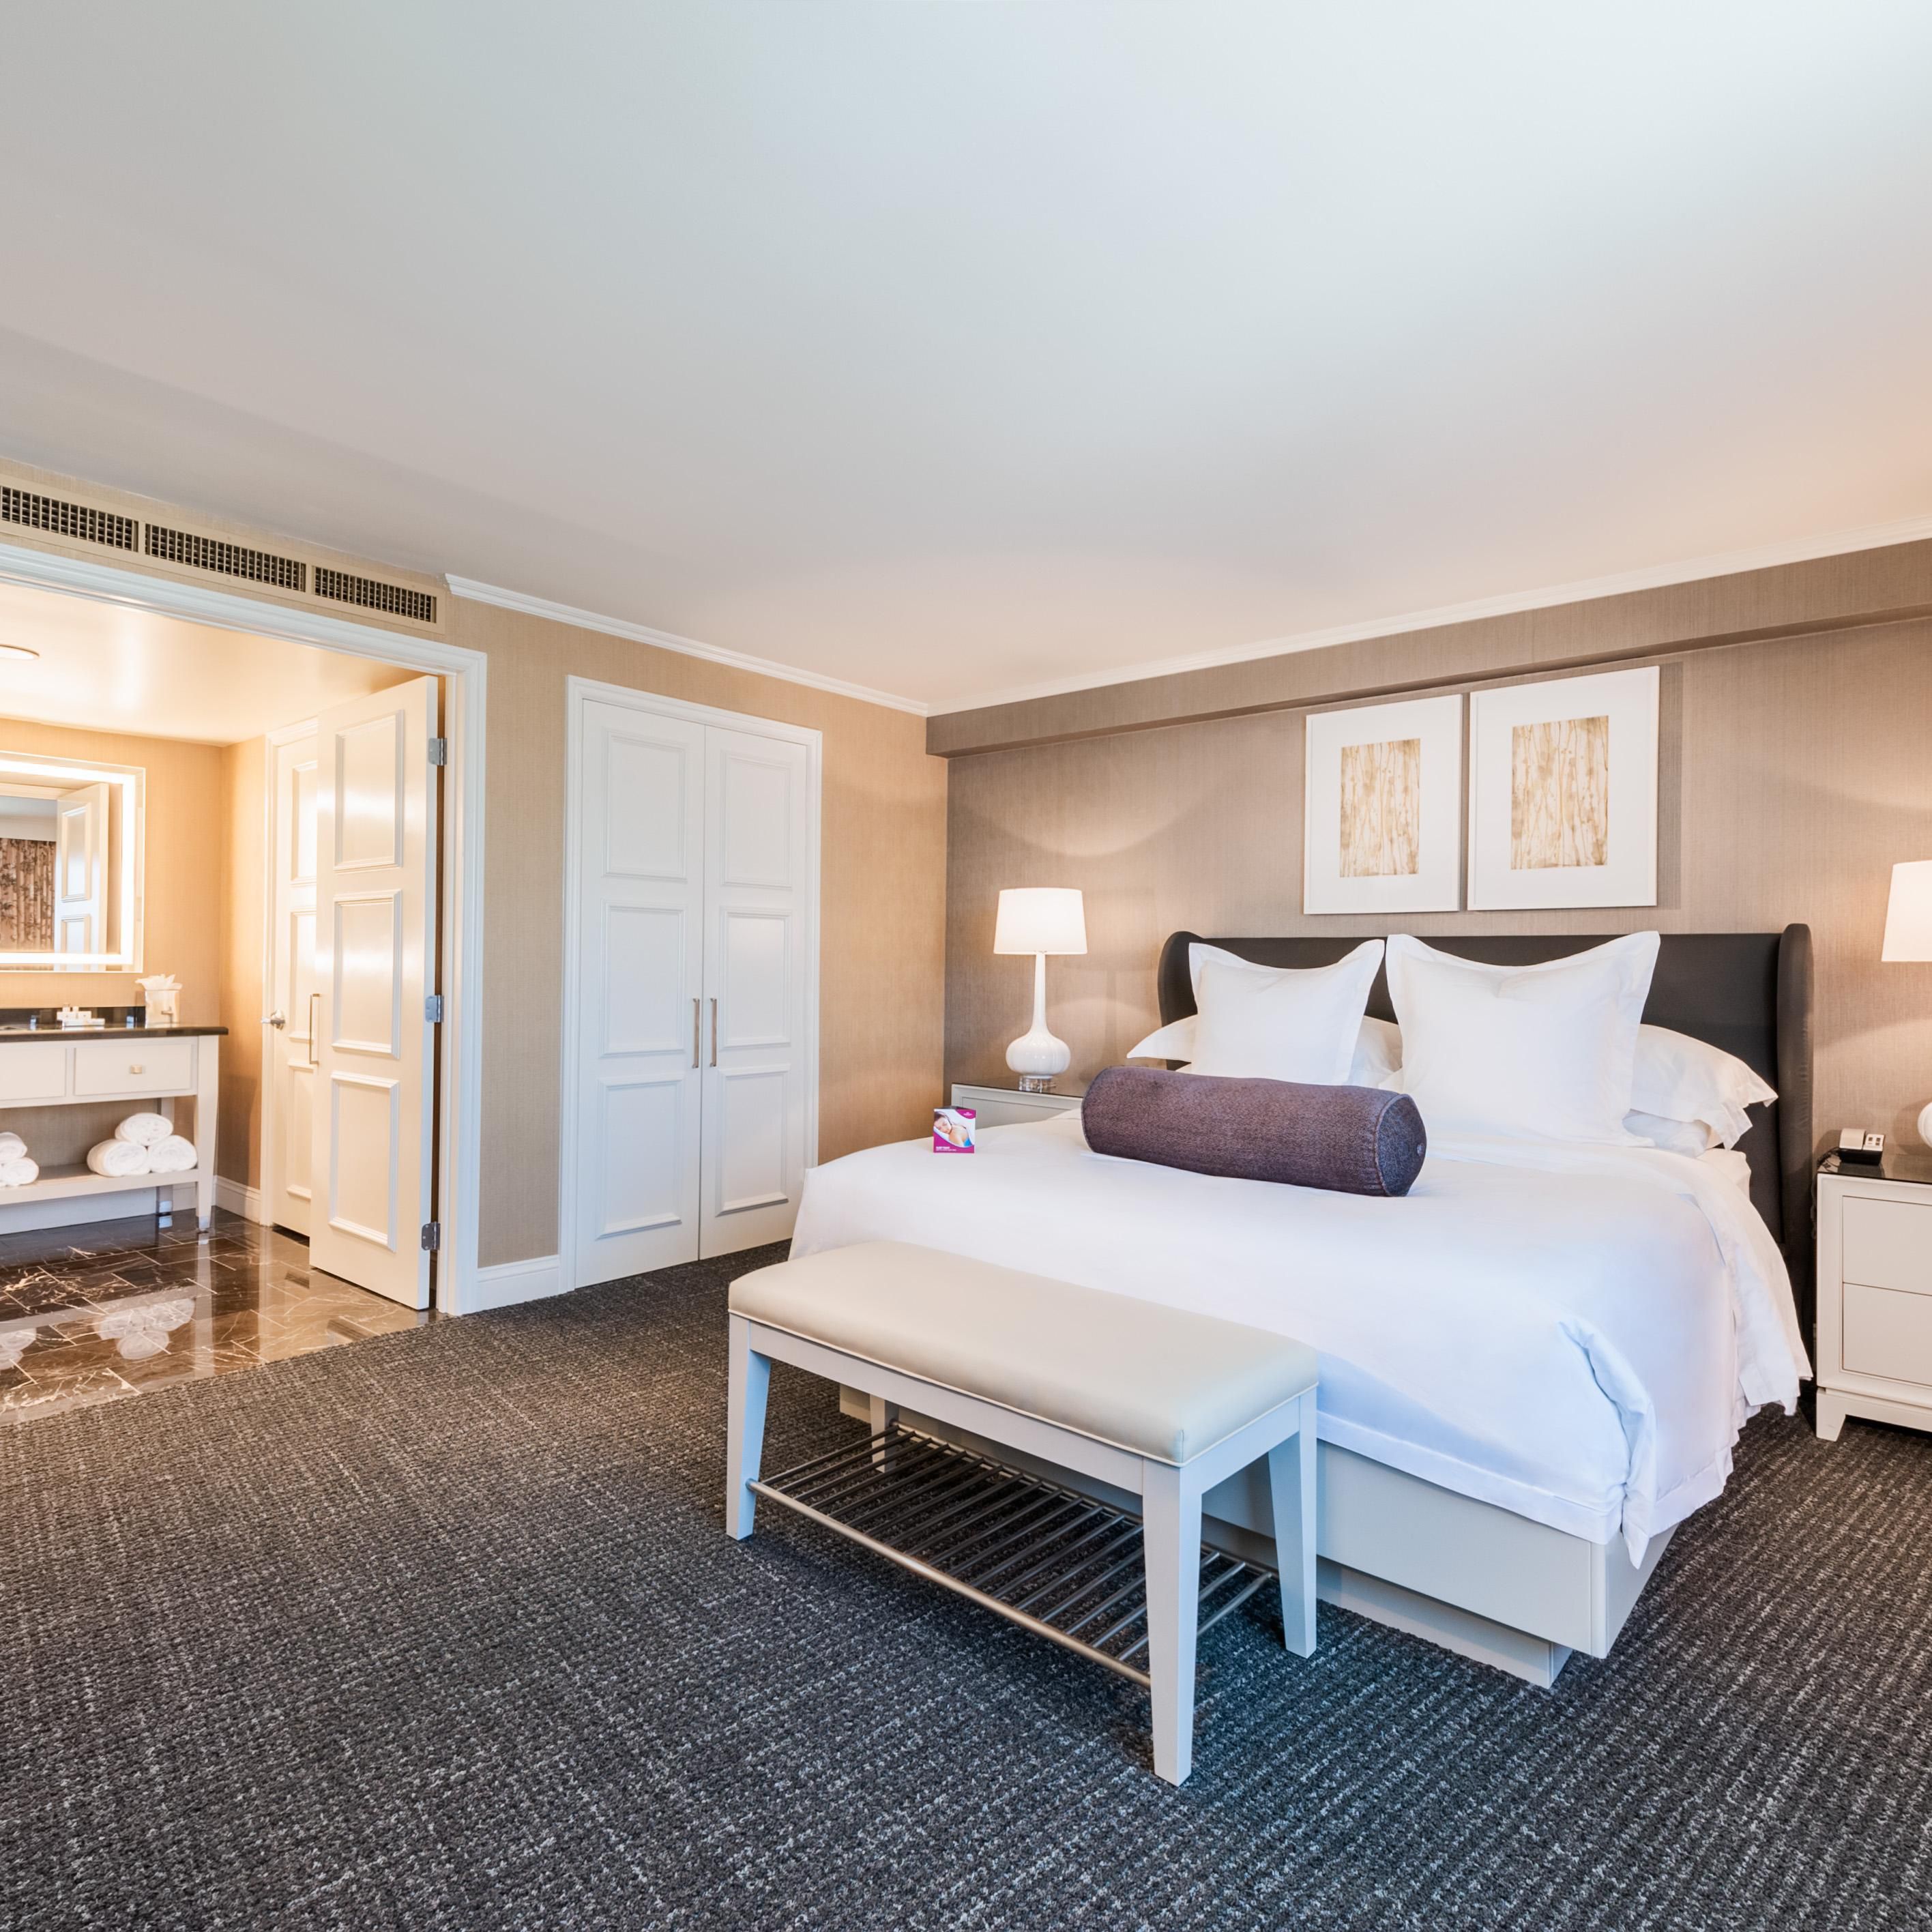 Style and comfort are the effects of our 2 room king suite